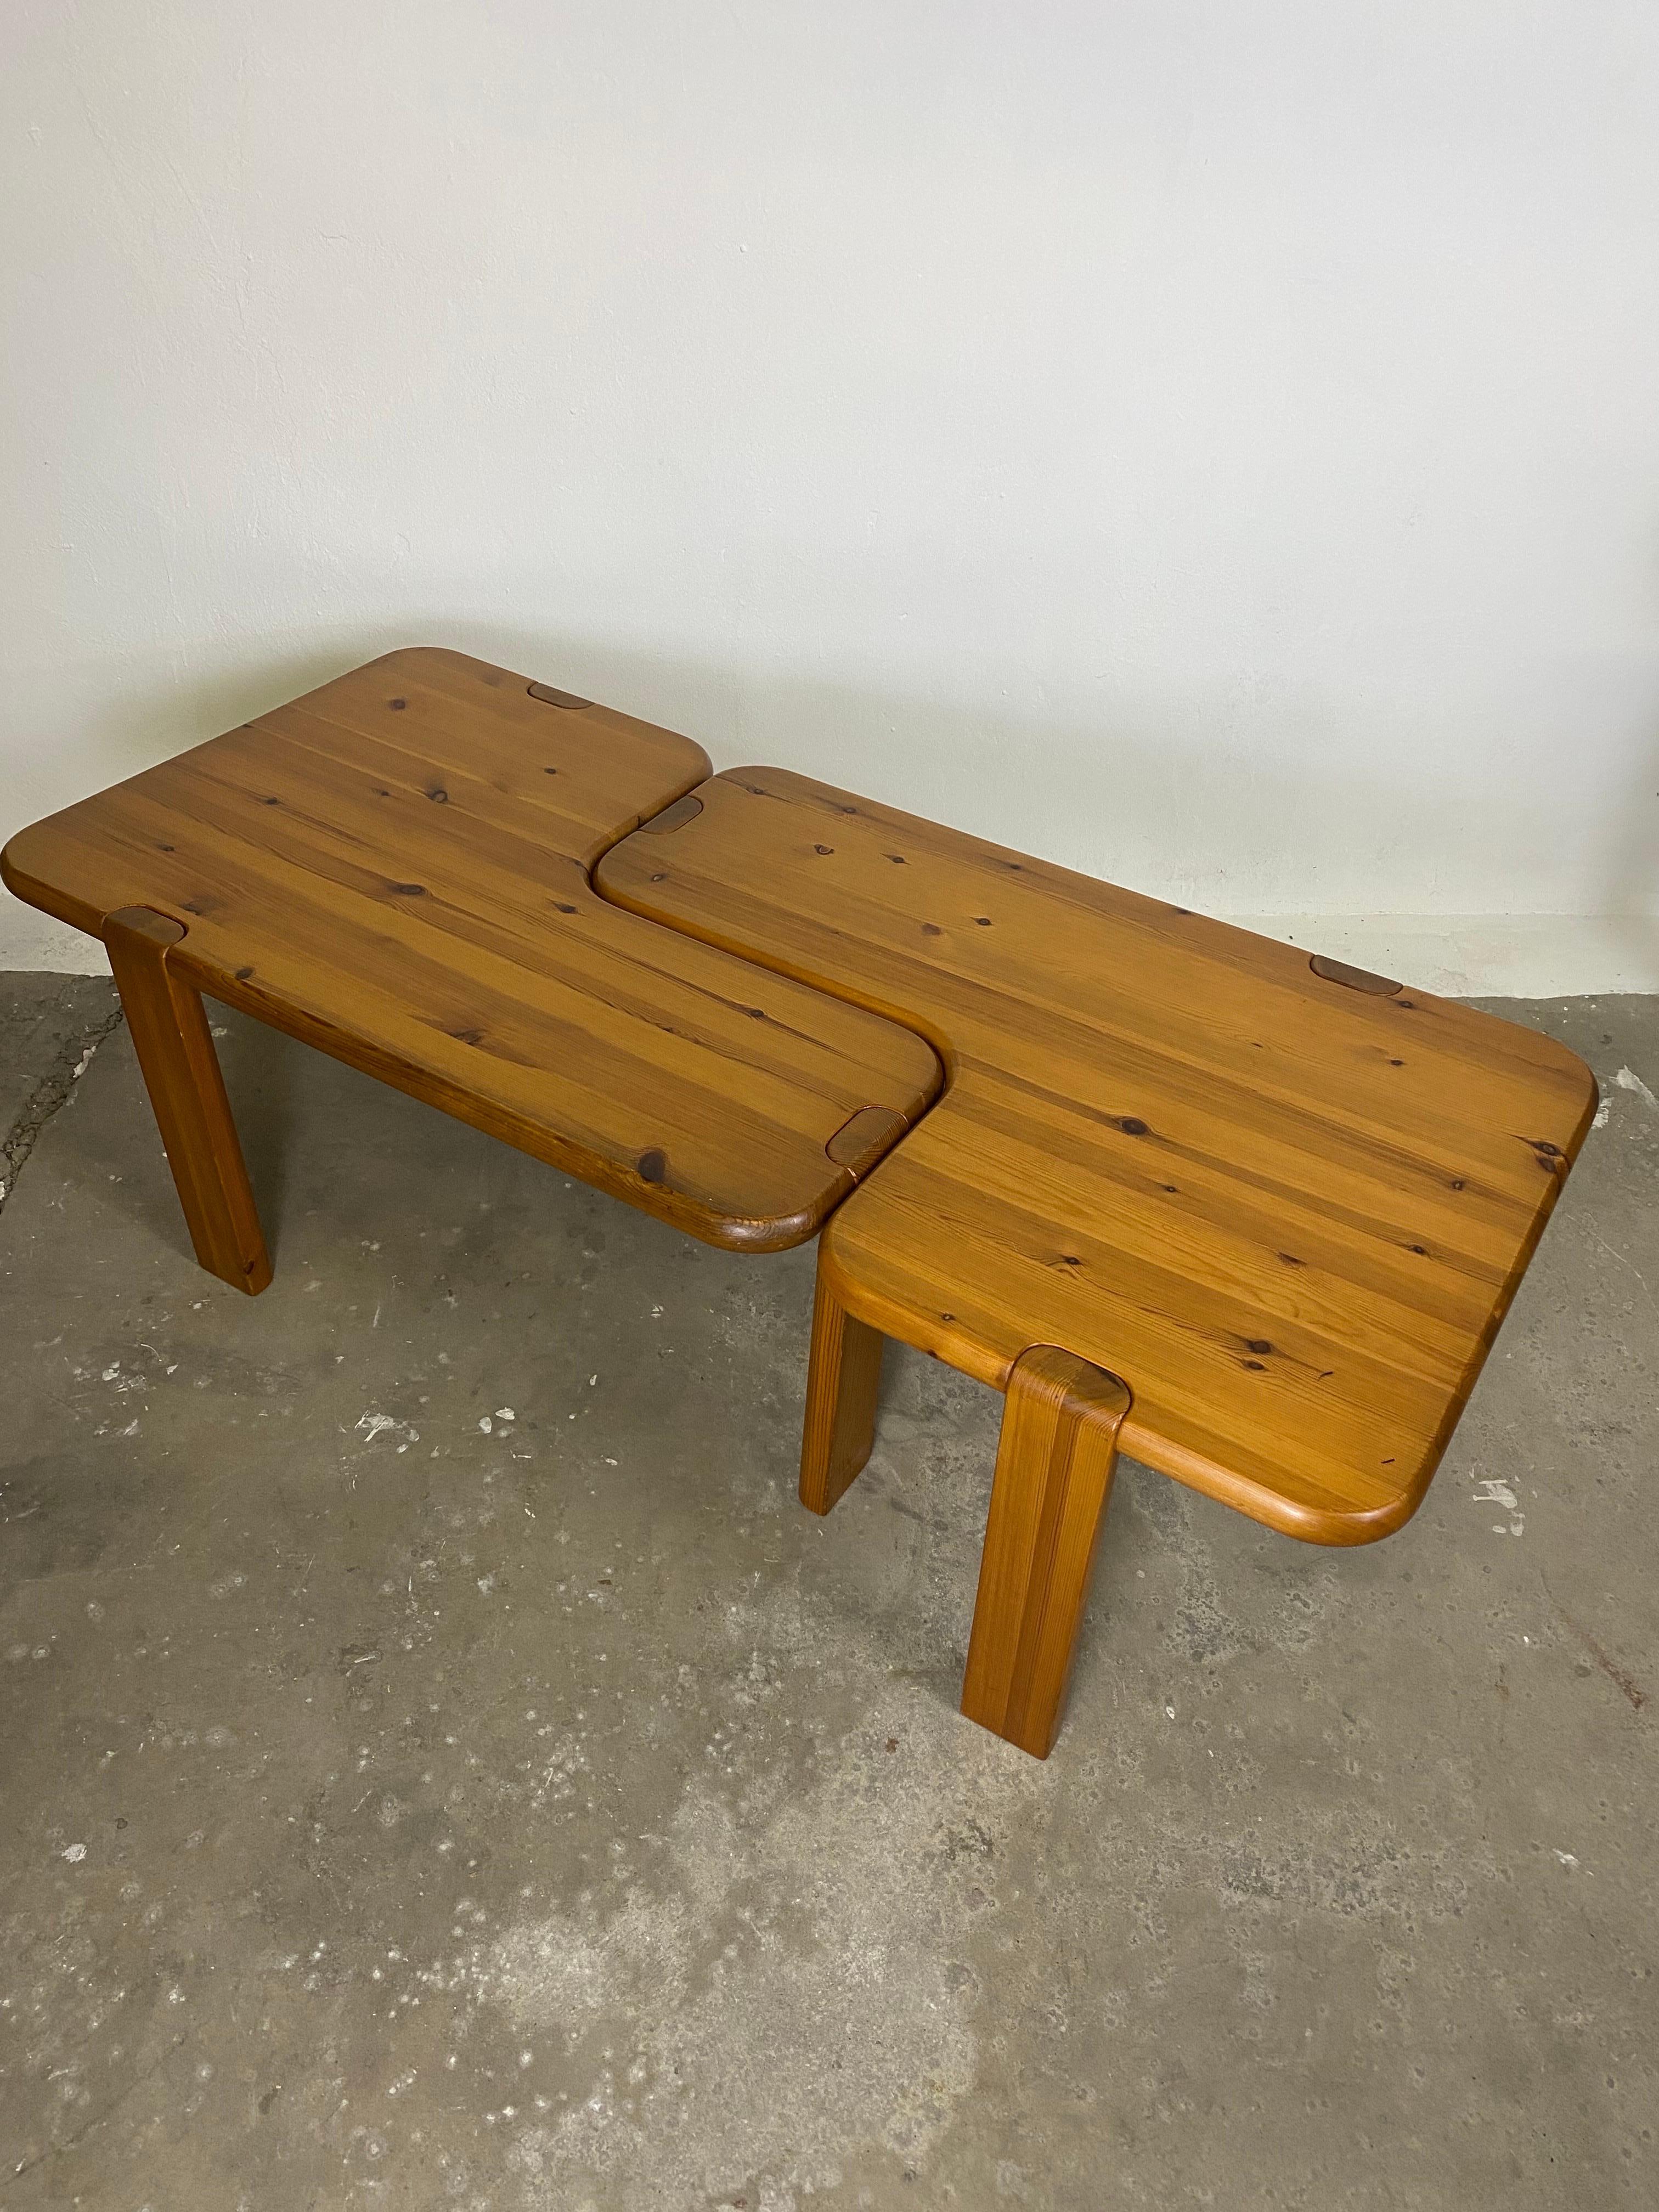 A Set of 2  labeled Coffetable by Aksel Kjersgaard for Odder Furniture in early 1970s.
Rounded edges and the organic shaped L-Form provide many combinations.
Made of solid pine wood with these tables there are different options for many room